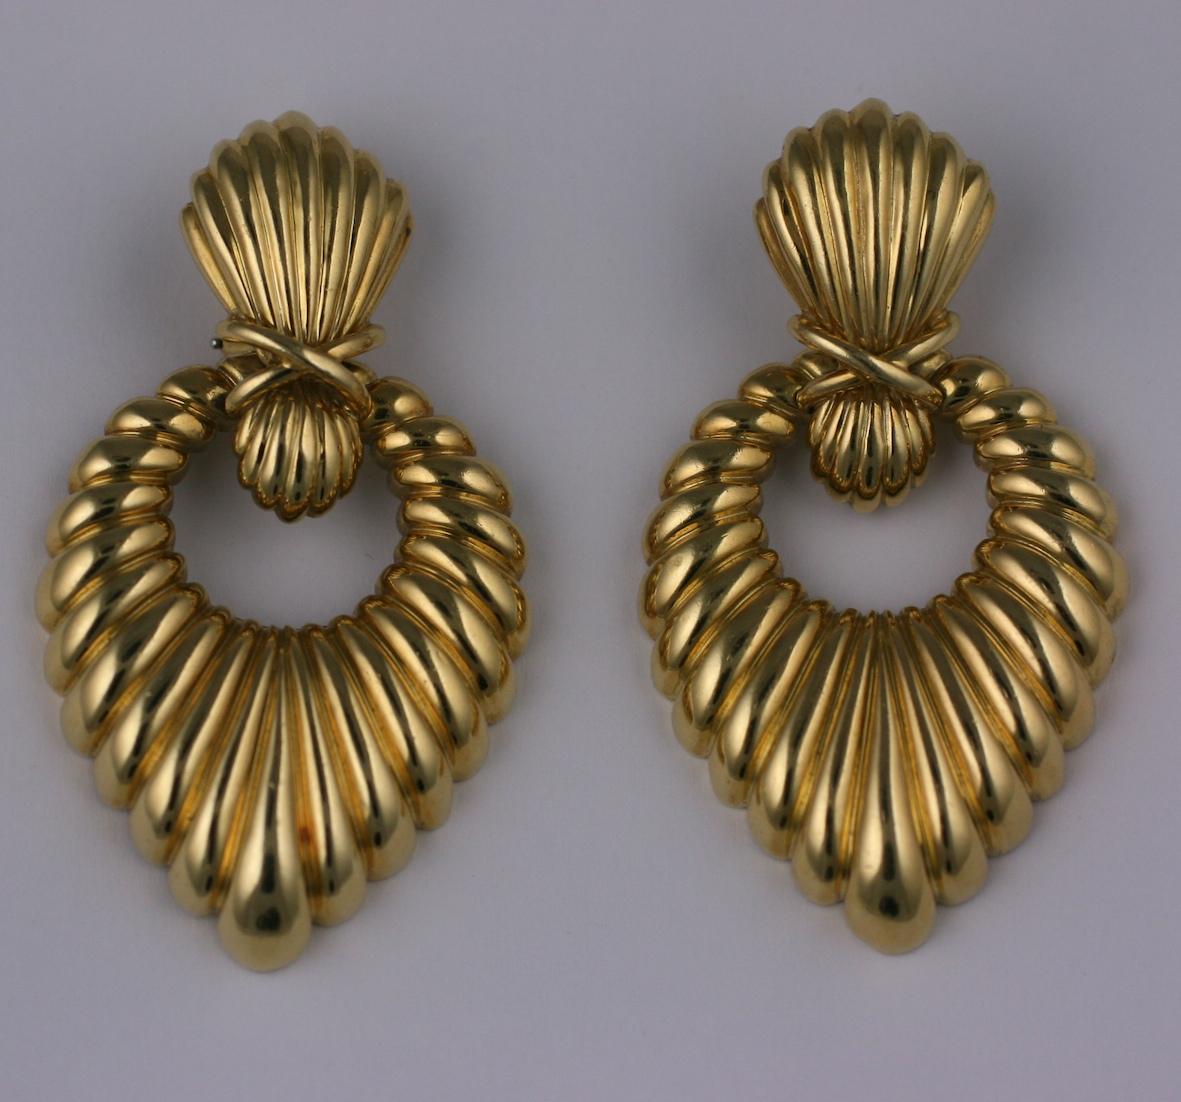 Hammerman Bros. ribbed gold articulated hoop earrings in 18k gold. Heavy in weight but well distributed with sturdy earclips, 1980's USA. 37.7 dwt. Very high quality and classic design. 1980's USA. 
Excellent condition.